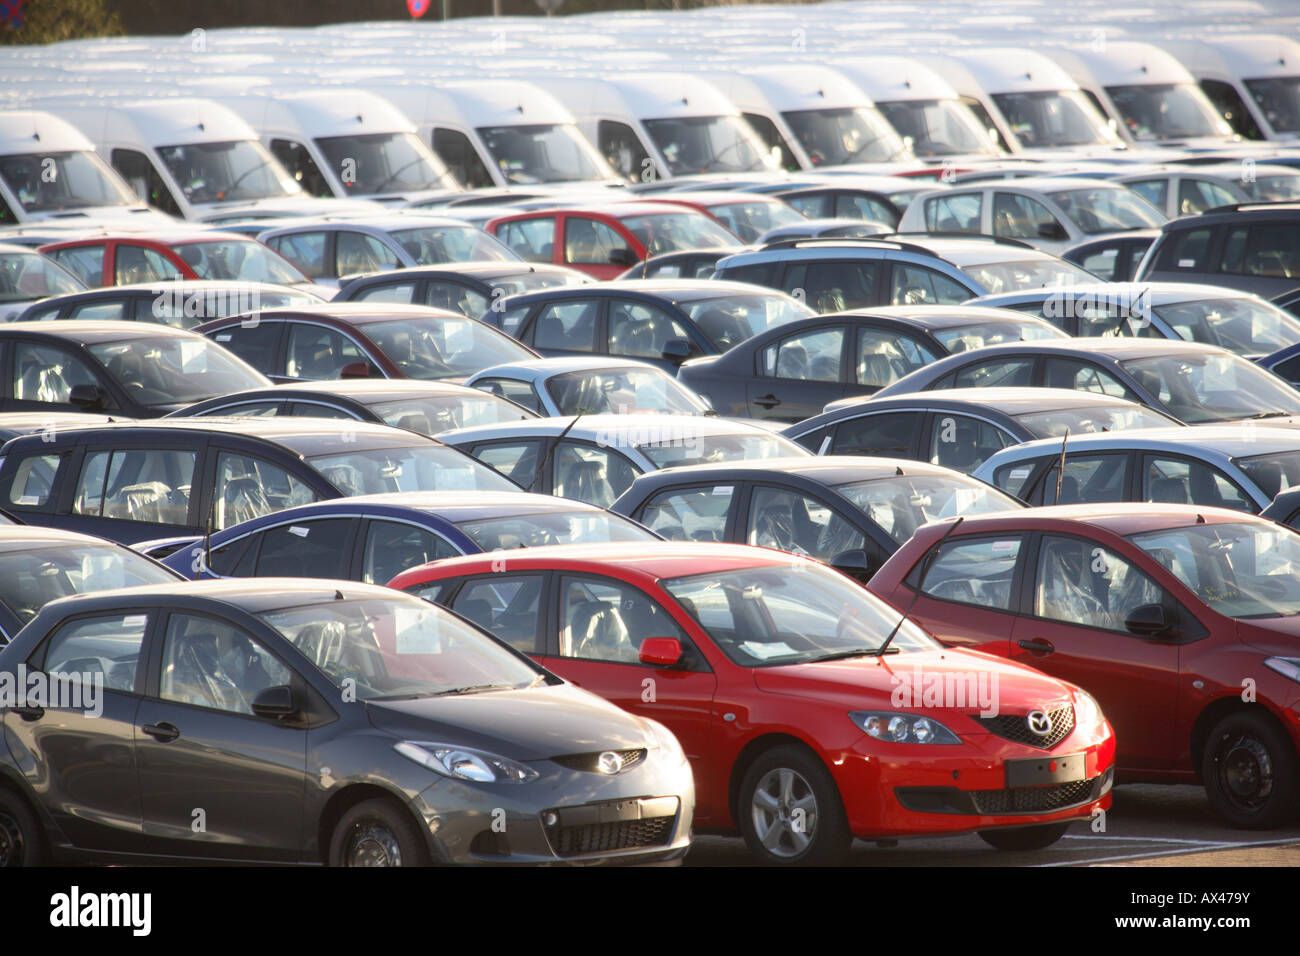 Rows of brand new cars and vans in a car lot awaiting distribution Stock Photo